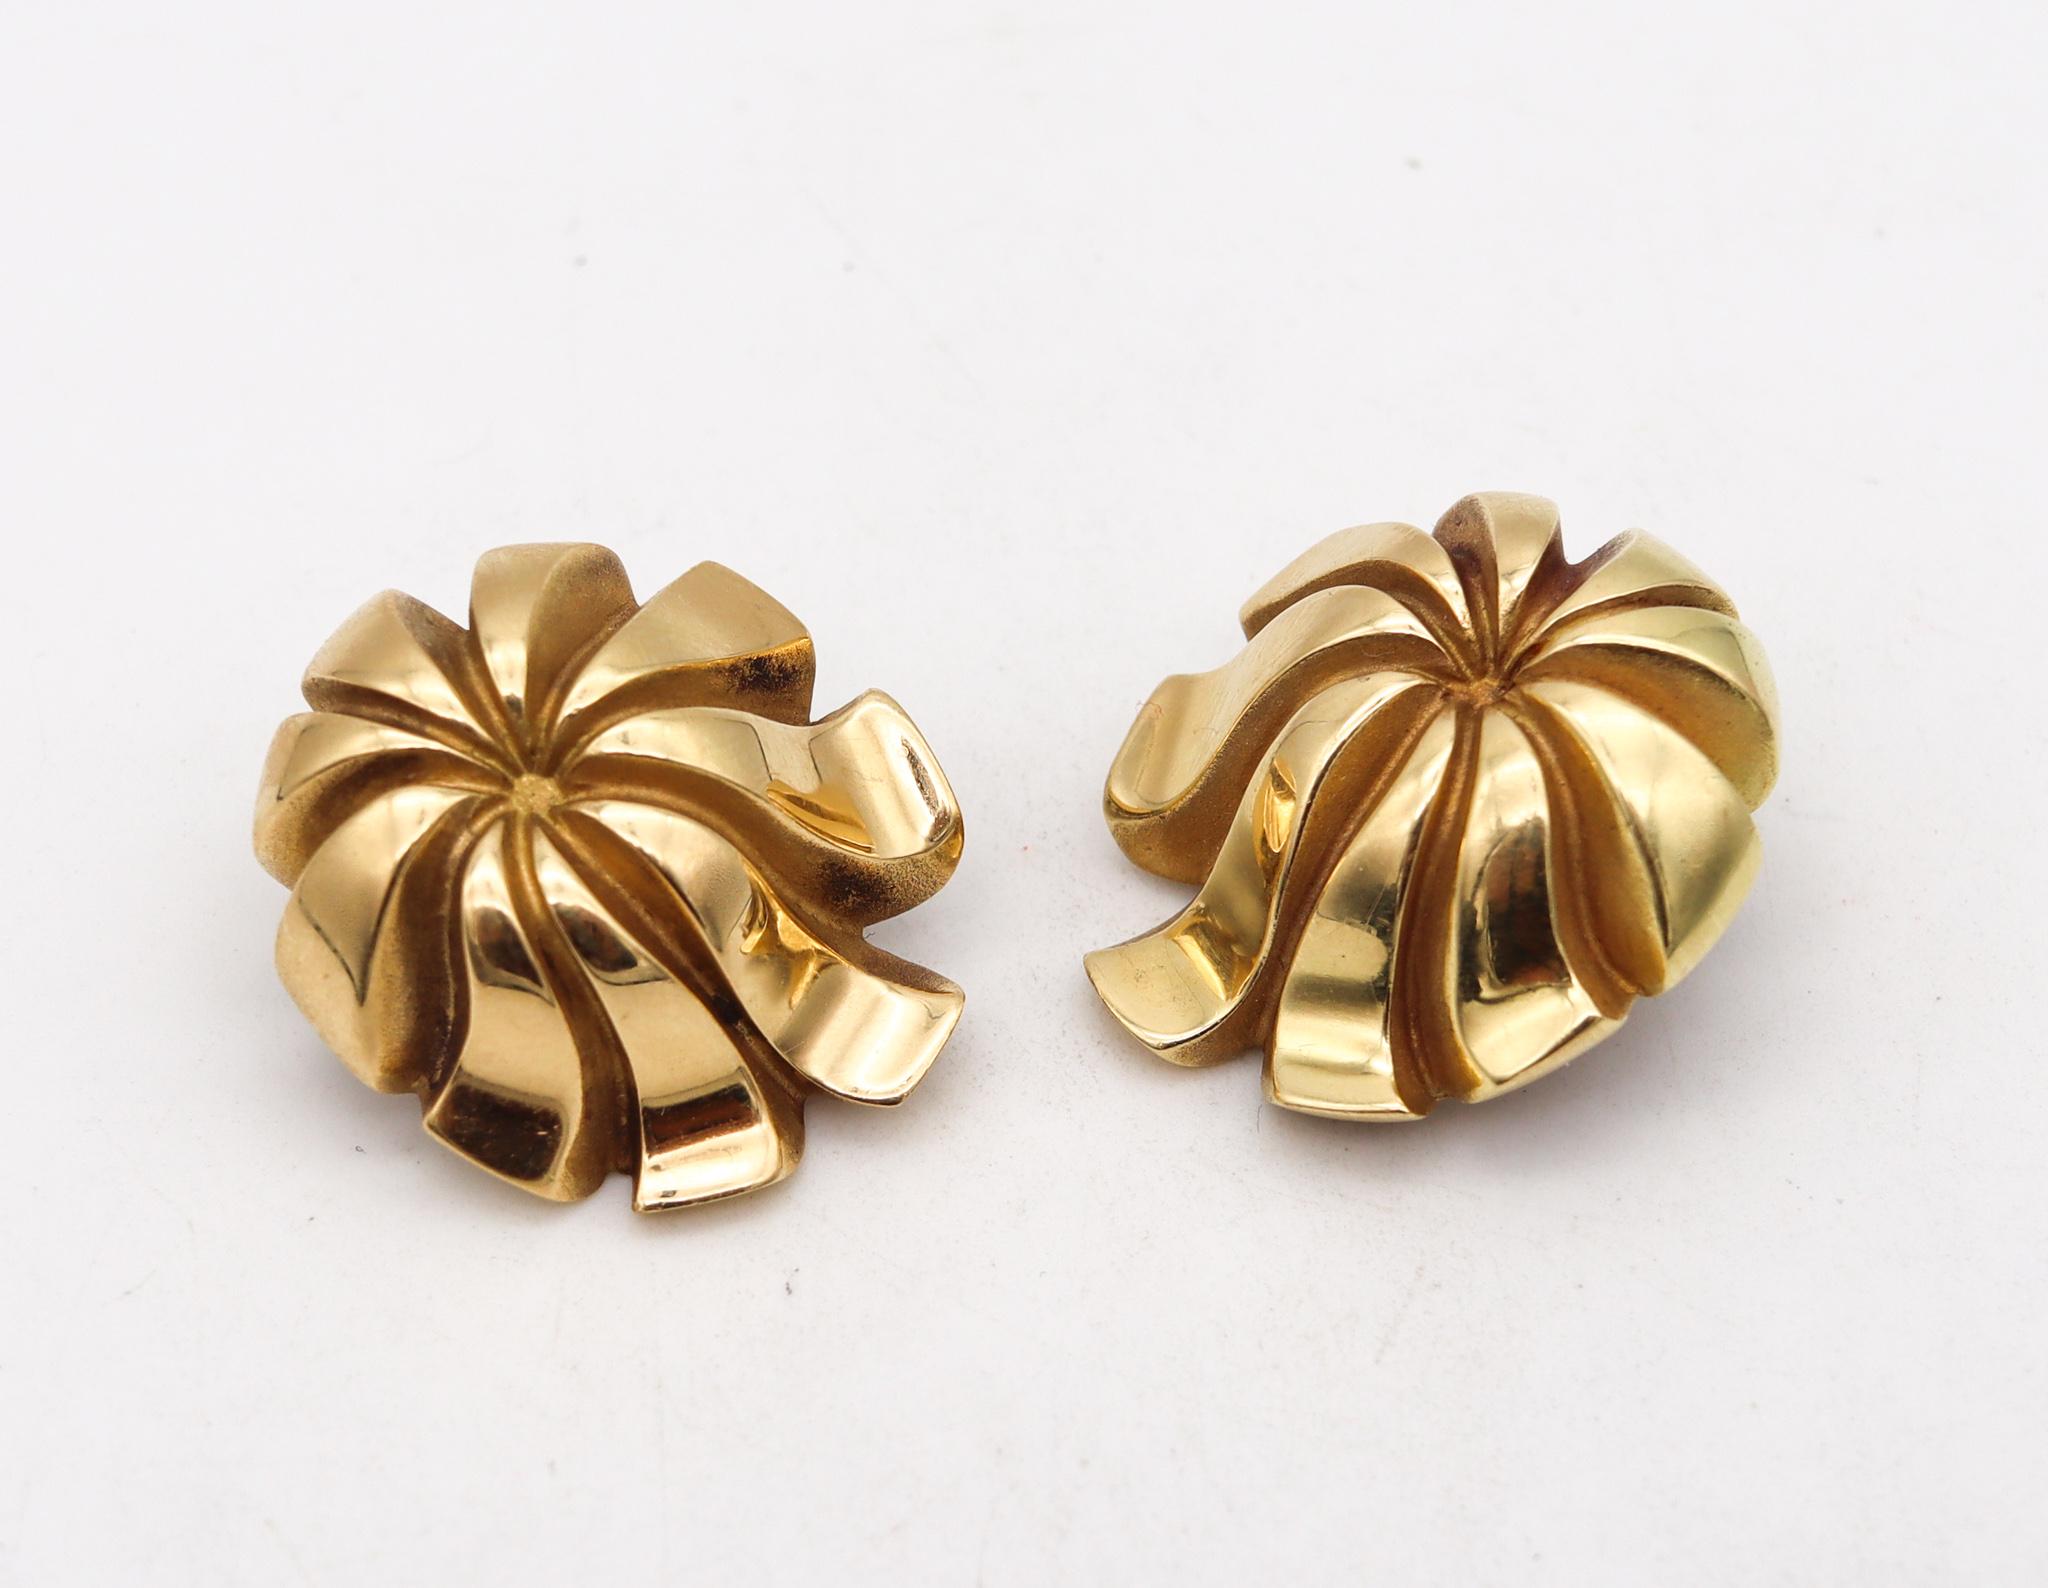 Chrysanthemum earrings designed by Tiffany & Co.

Beautiful vintage pieces created in New York city at the Tiffany Studios, back in the late 1970's. These sculptural clip earrings has been crafted with japonisme patterns in the shape of